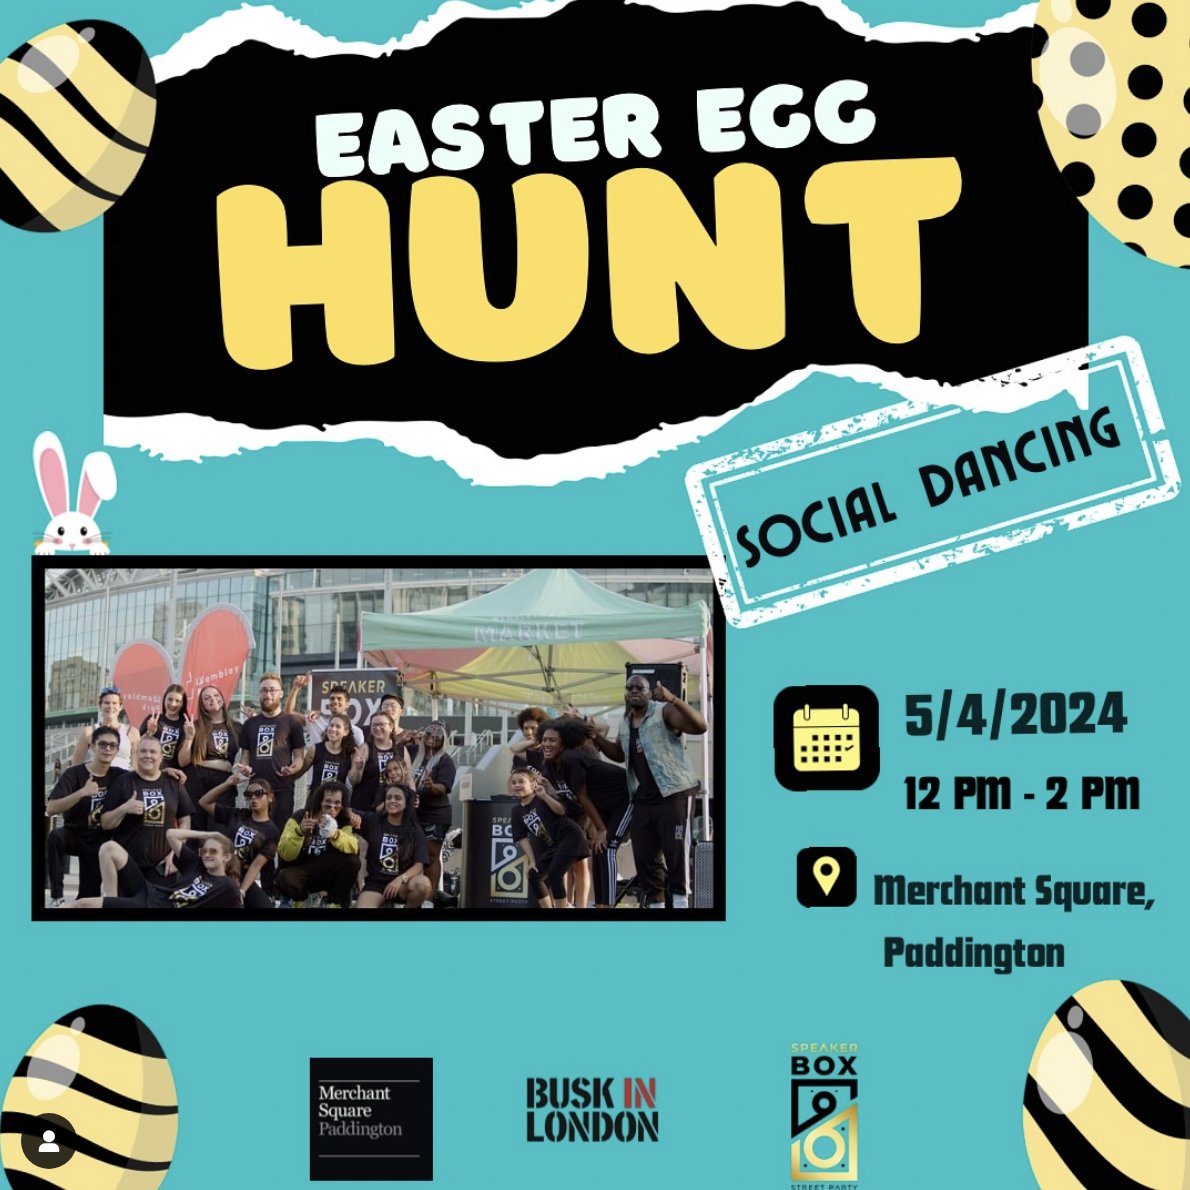 ✨ Join @speakerboxparty on Friday 5th of April from 12 pm to 2 pm for their family-friendly social #dance event! 🐇🥚🌈 You will learn basic dance steps and have a wonderful immersion in a multiple genre of music from around the world! 🌎 📍@merchantsqevent Paddington